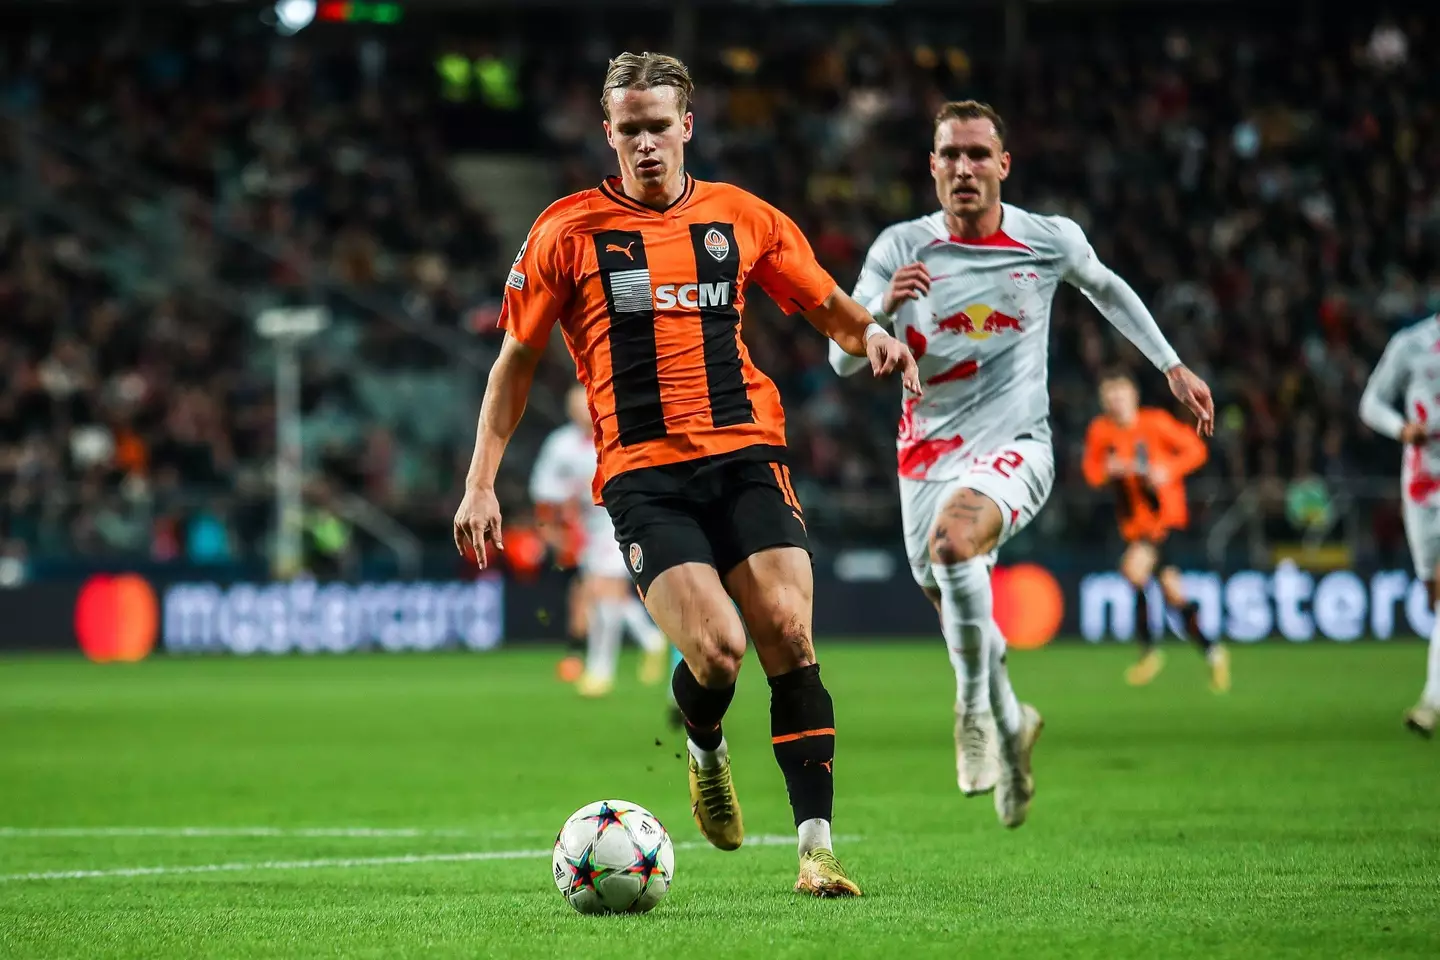 Mudryk has been strongly linked with Arsenal (Image: Alamy)